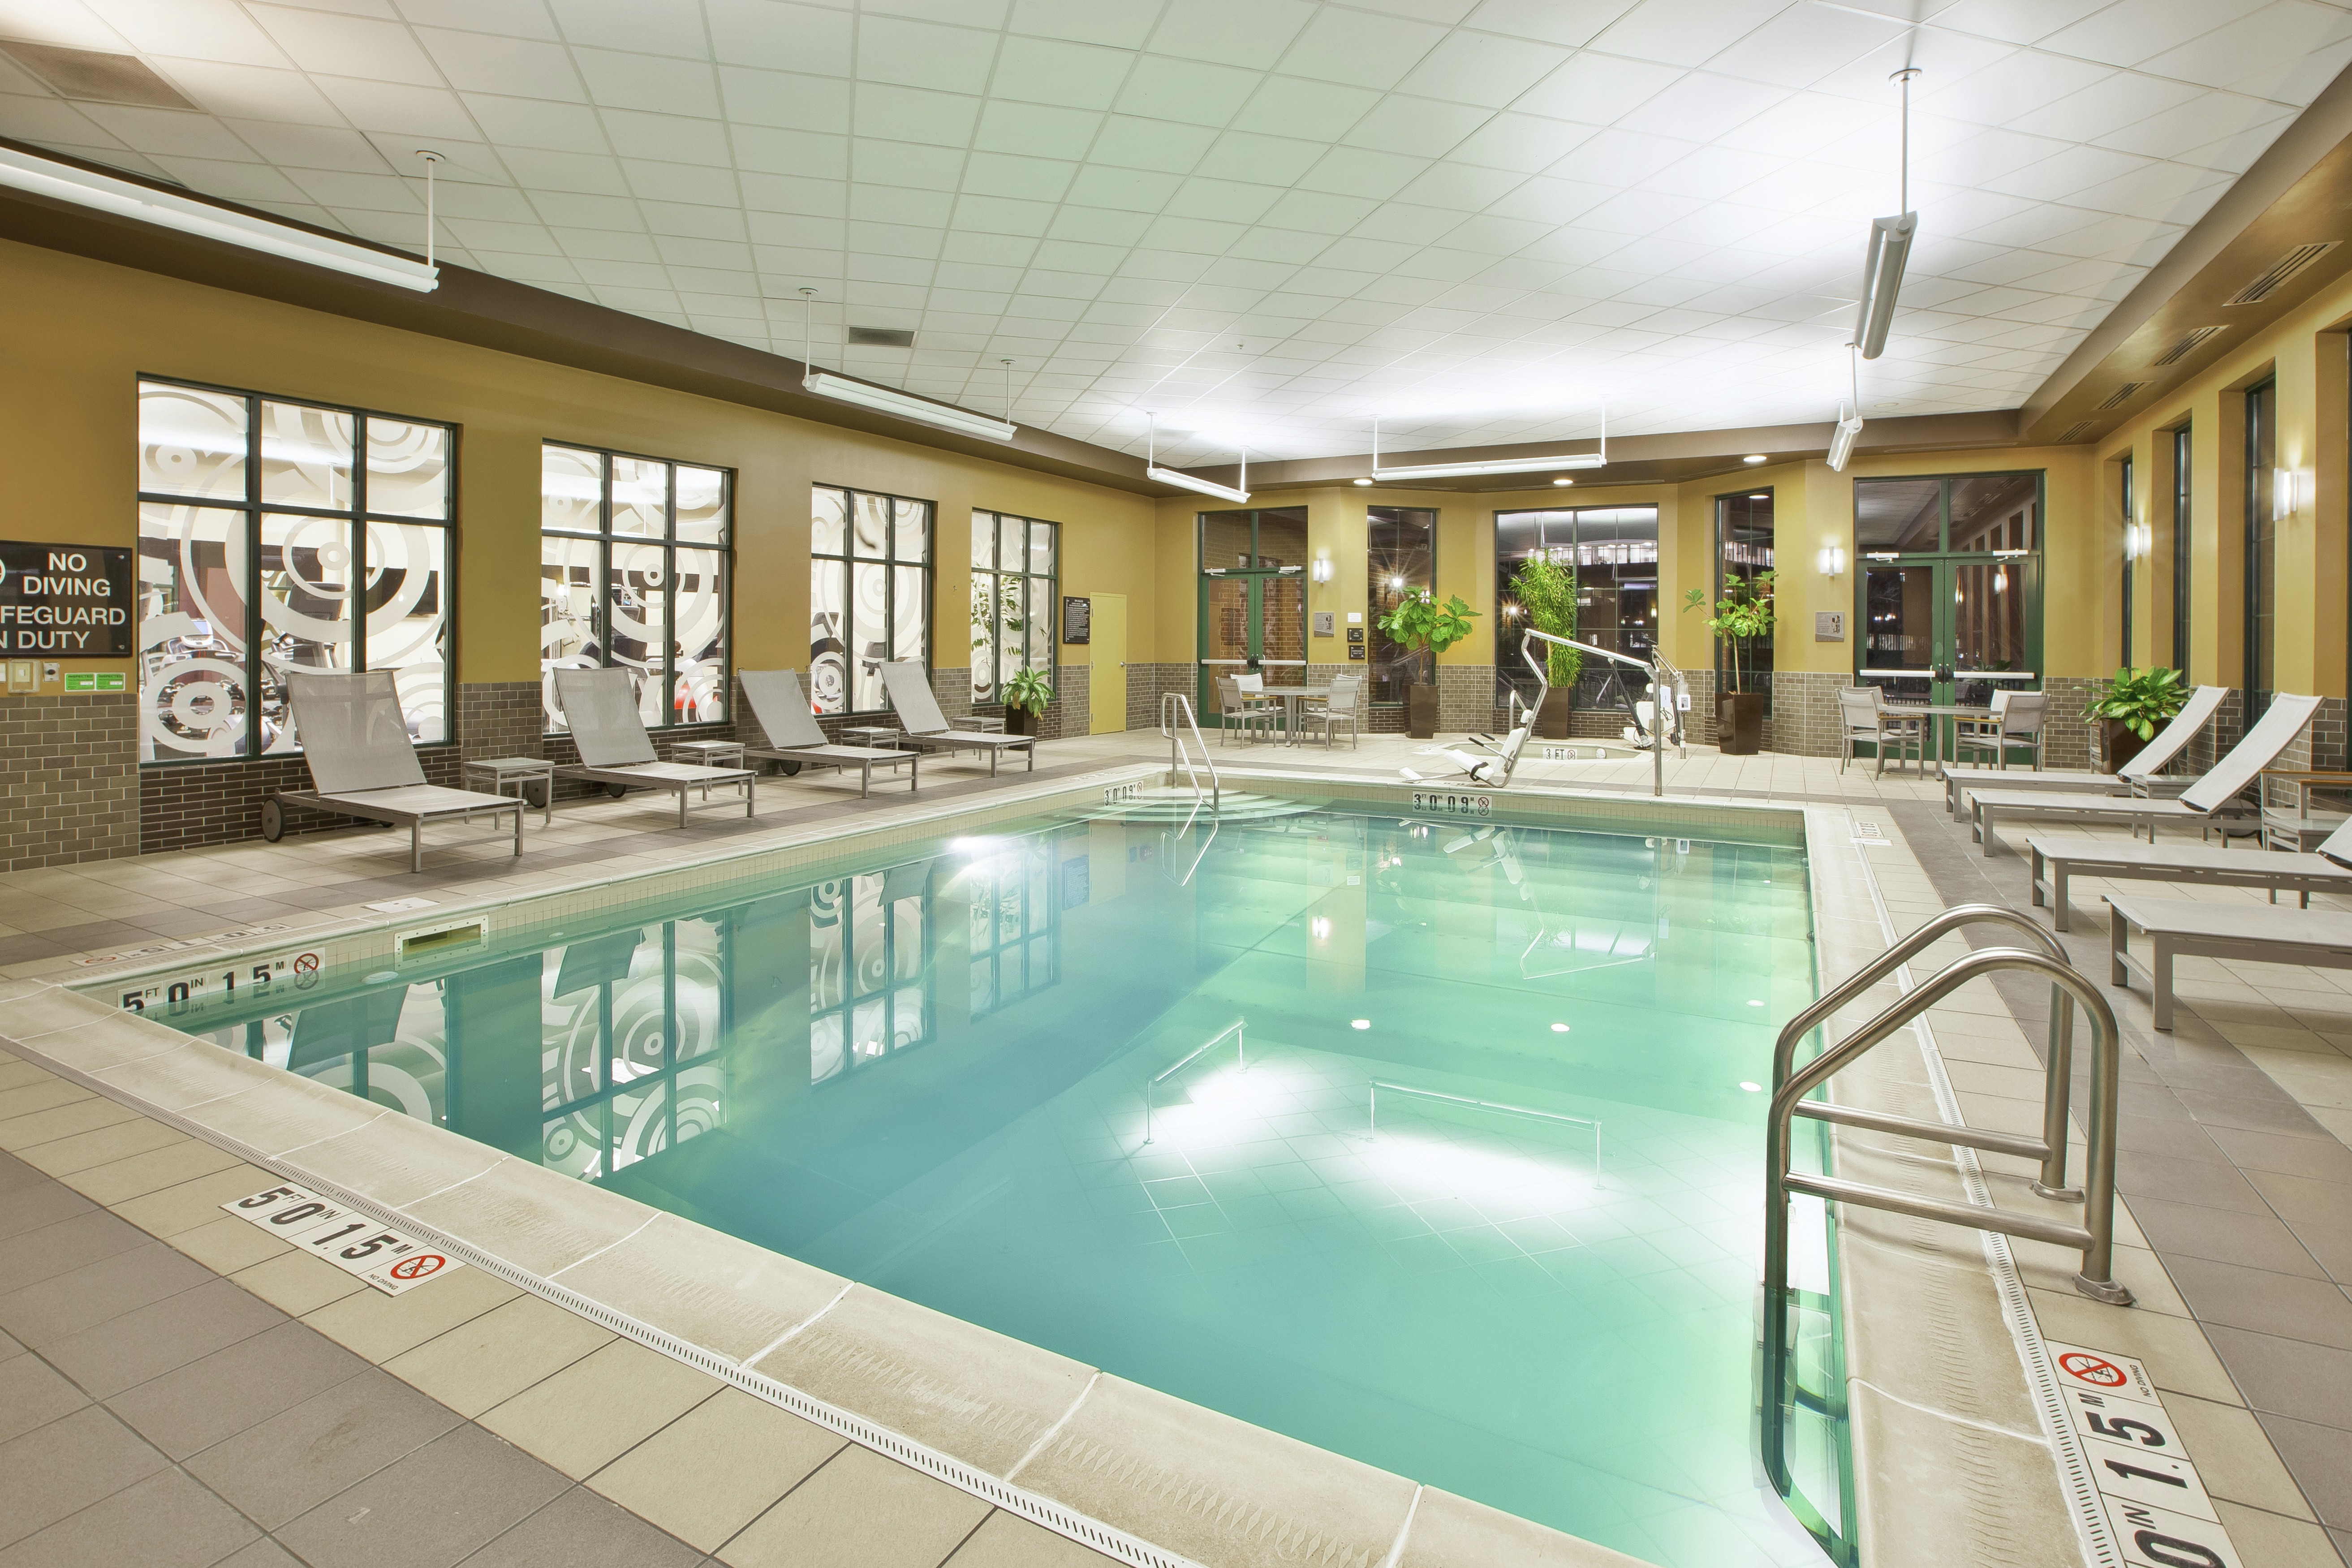 Relaxation Loungers and Windows by Indoor Pool